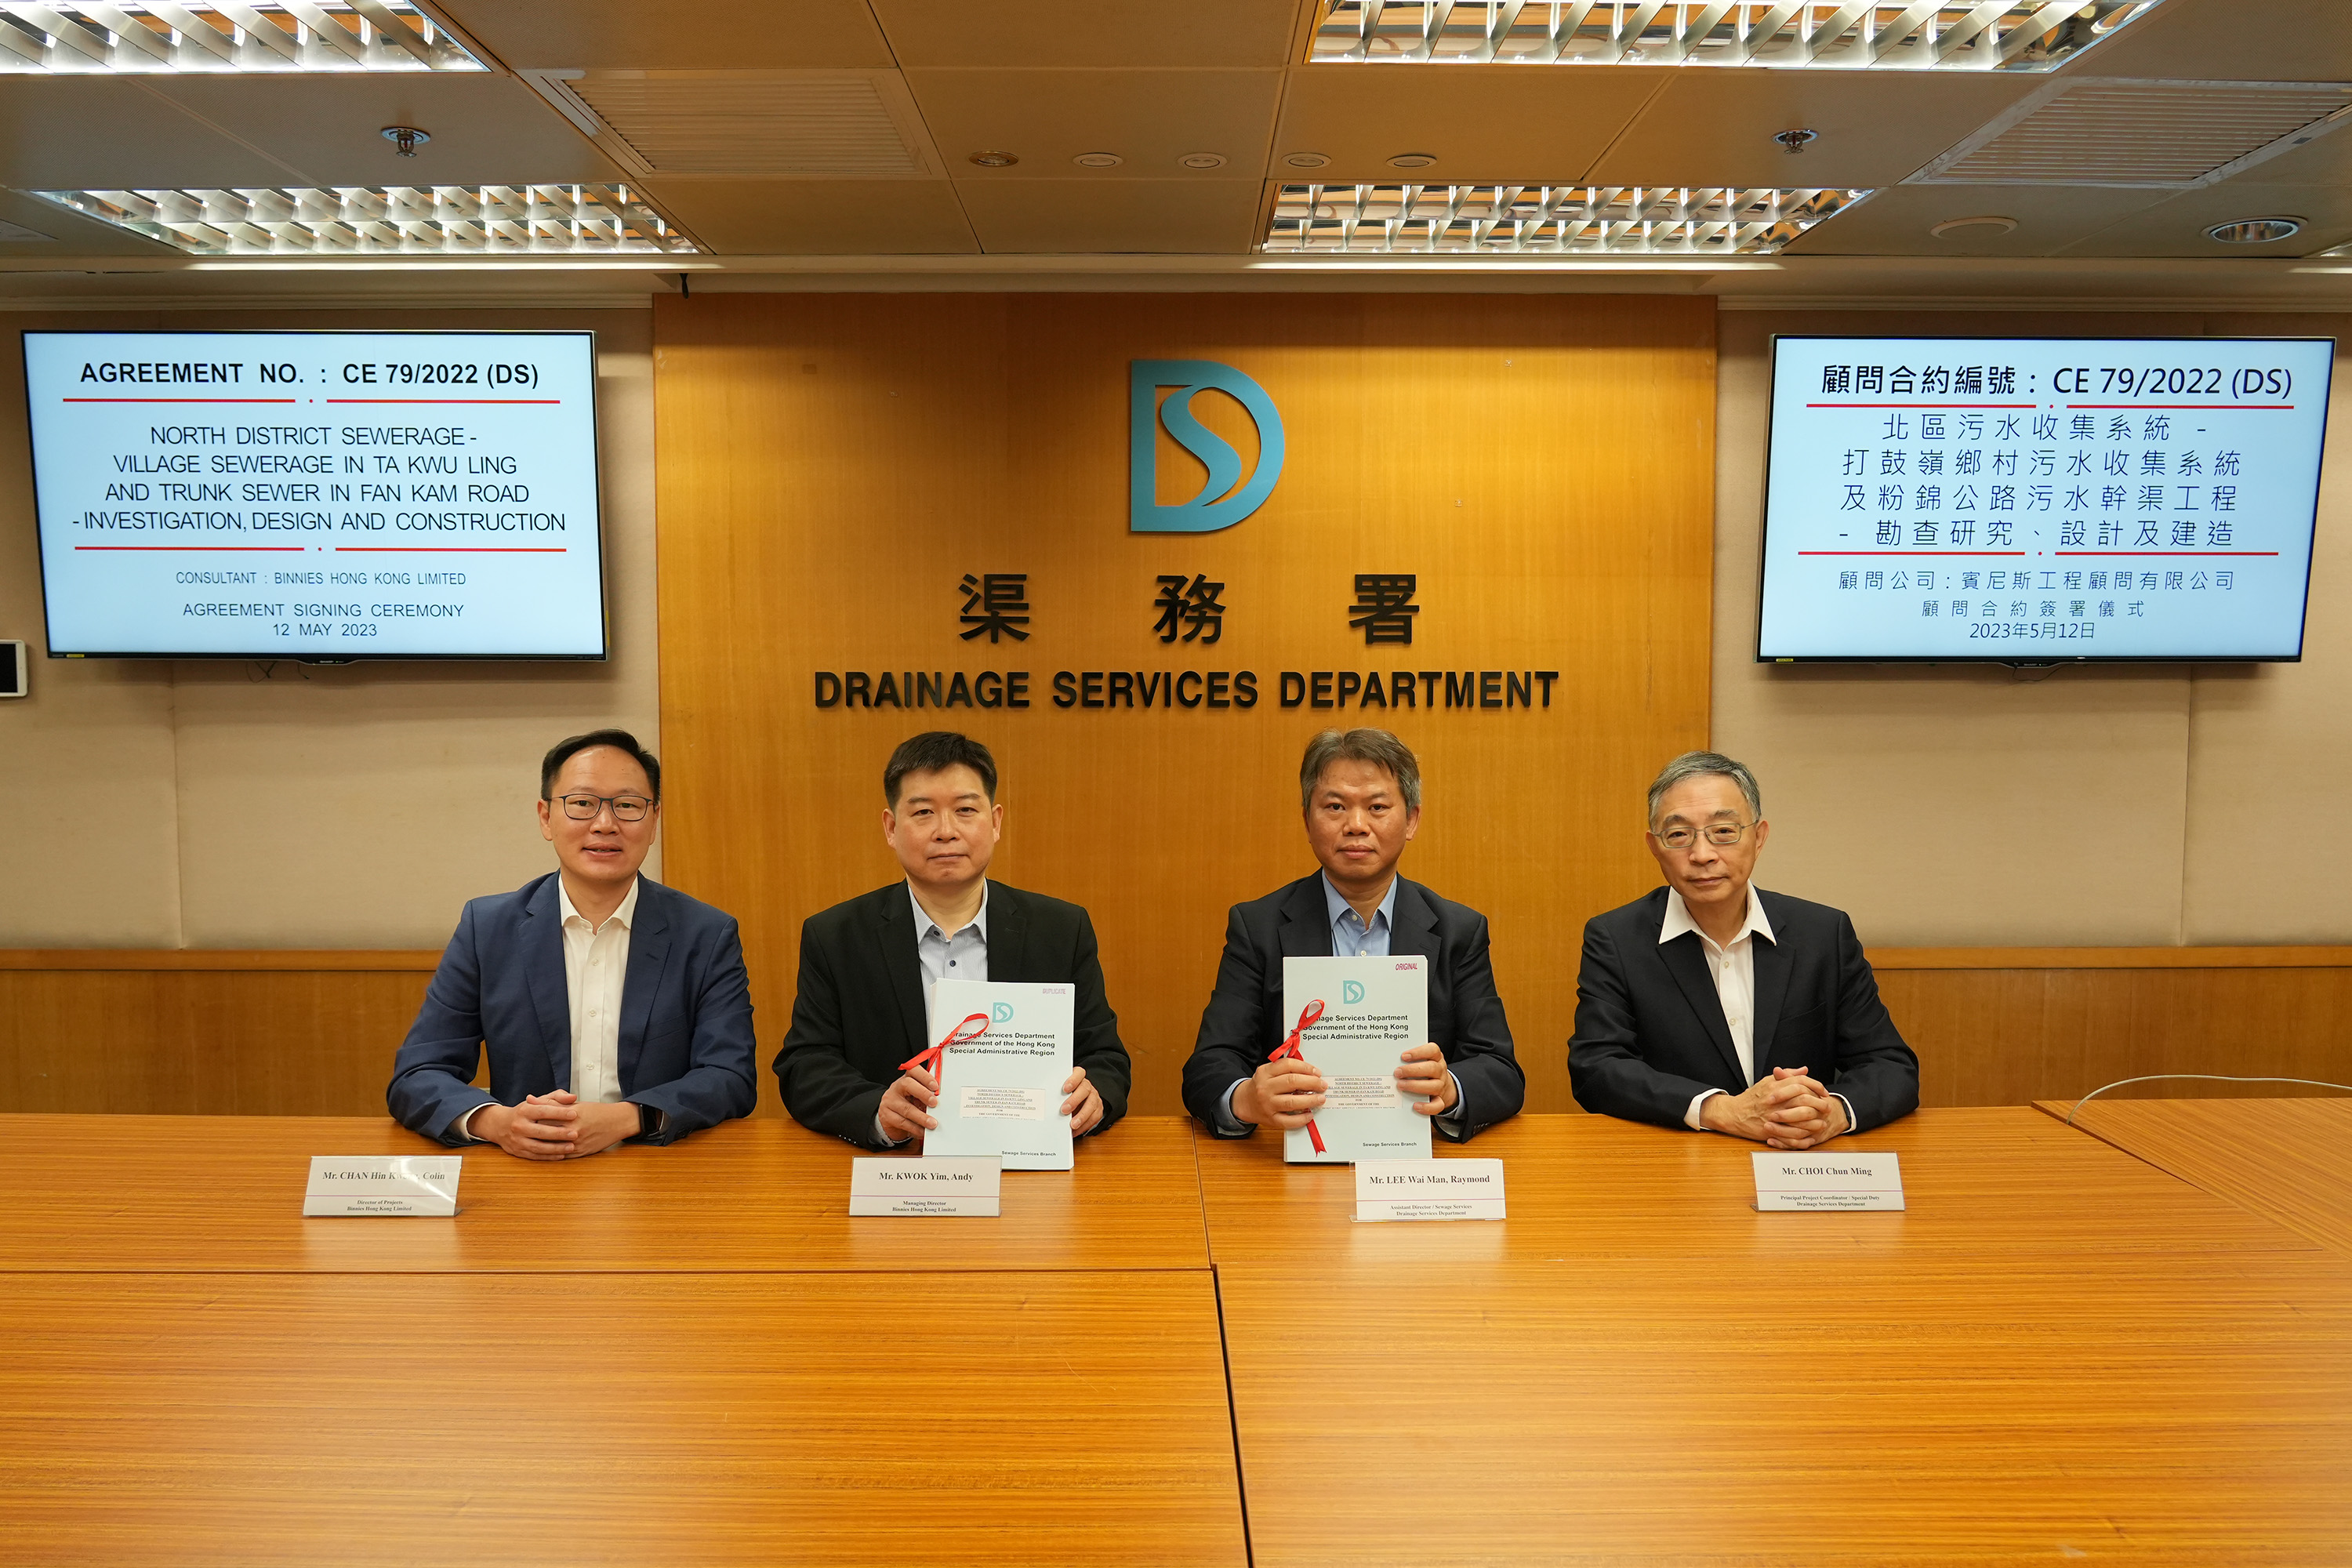 The Assistant Director/Sewage Services, Mr LEE Wai-man, Raymond (second right), Principal Project Coordinator/Special Duty, Mr CHOI Chun-ming (first right) of DSD and the Managing Director, Mr Andy KWOK (second left), Director of Projects, Mr Colin CHAN (first left) of Binnies Hong Kong Limited attended the Agreement Signing Ceremony